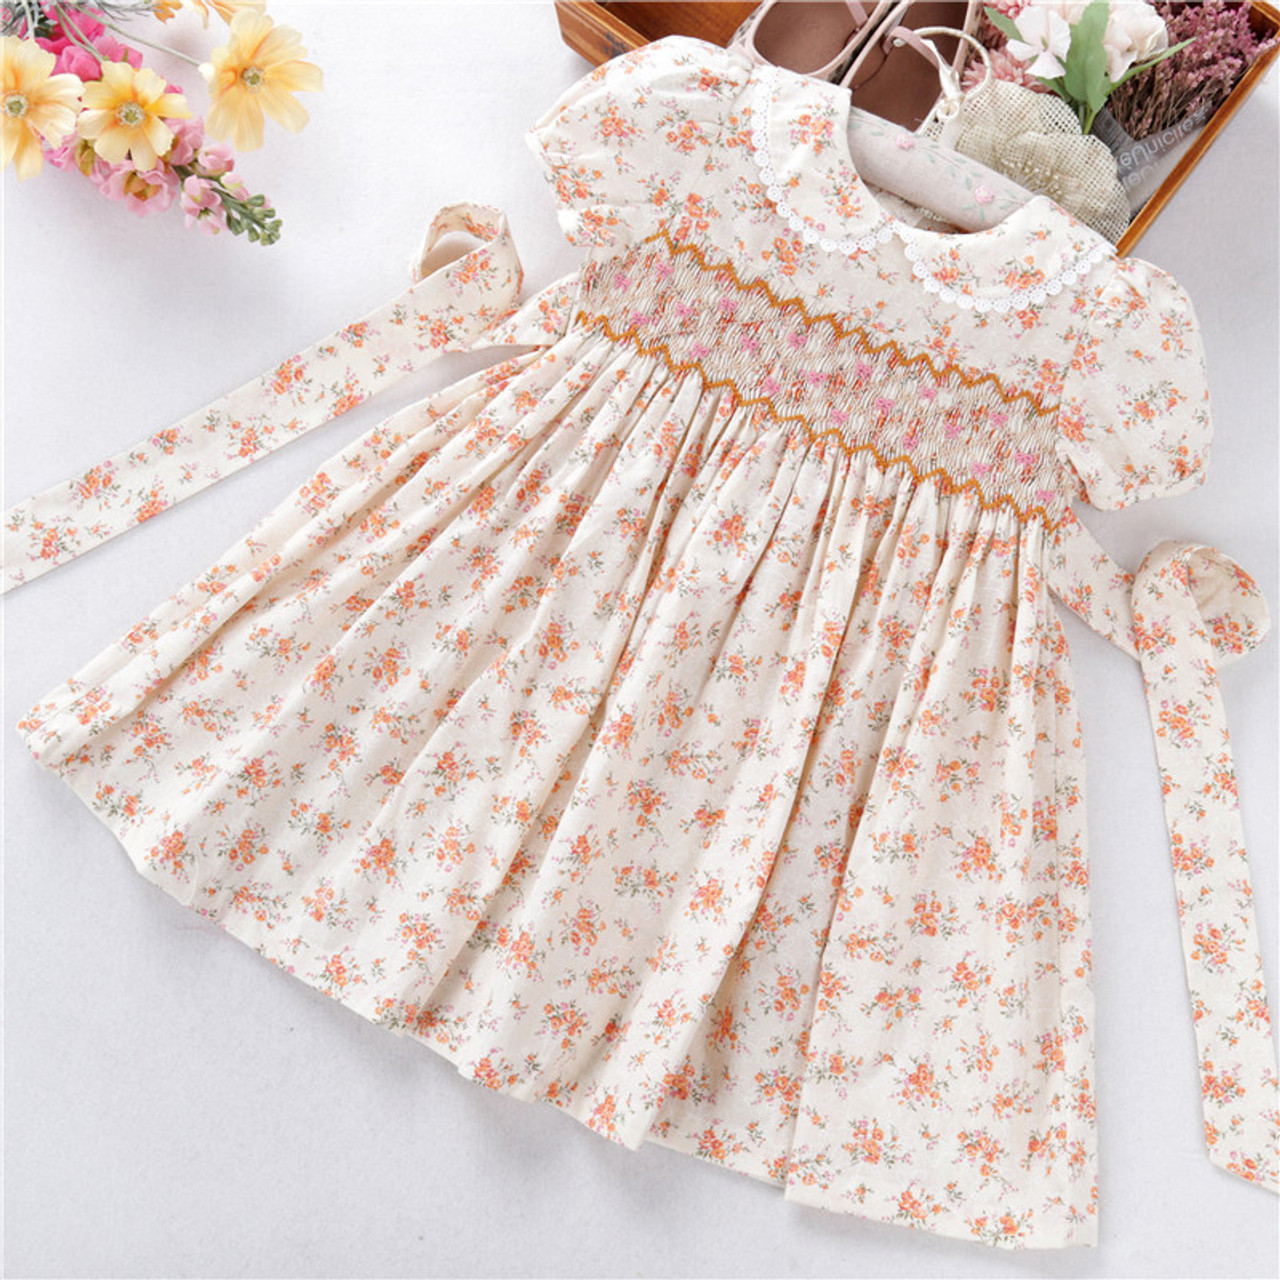 Hand Made Embroidery Smocked Dresses for Girl's Clothing Floral